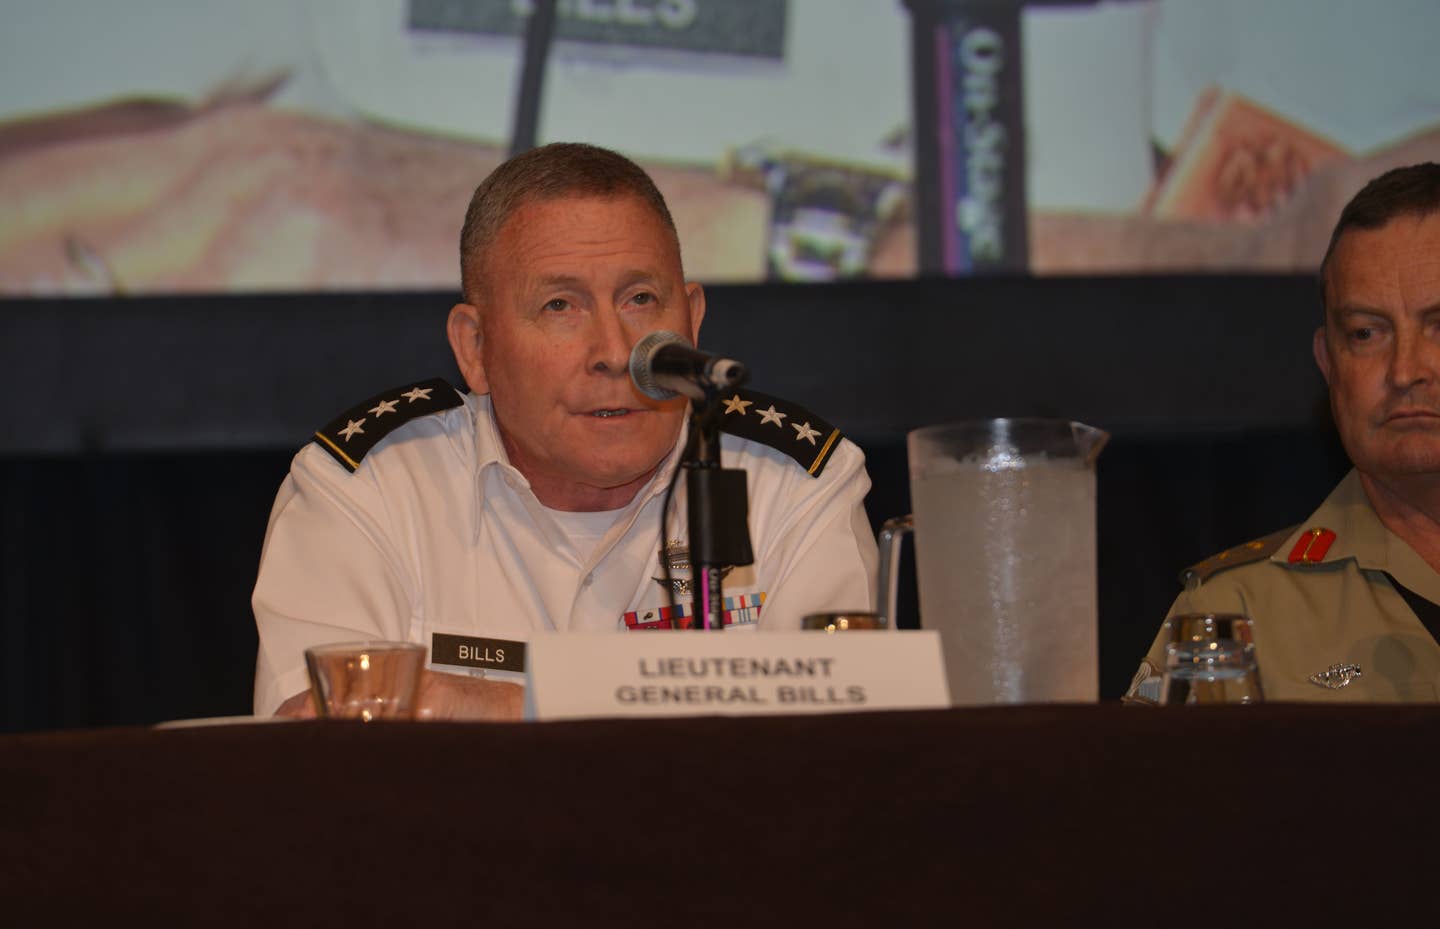 Lt. Gen. Michael Bills, 8th Army commanding general, discusses warfighting in a large city environment during the 2018 AUSA Conference.